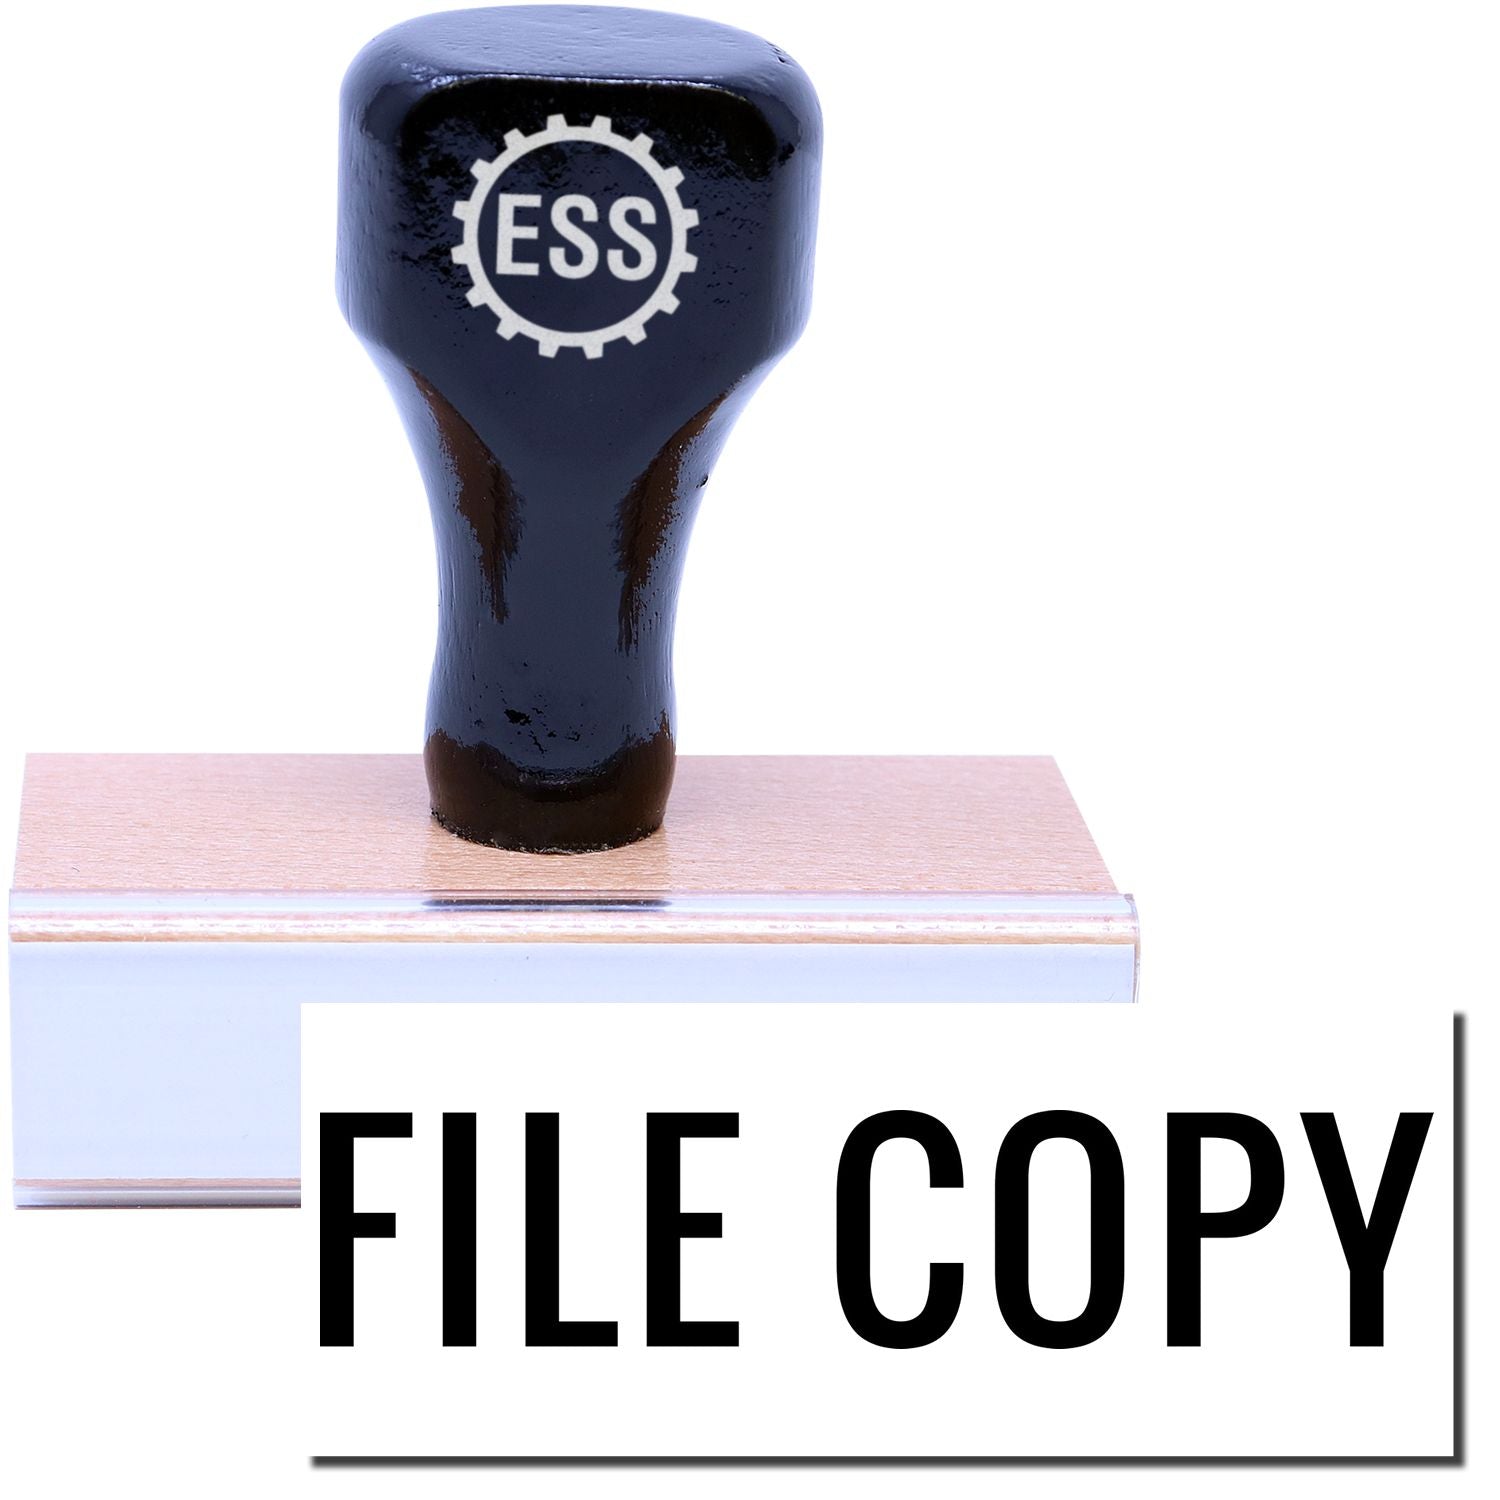 A stock office rubber stamp with a stamped image showing how the text "FILE COPY" in a narrow font is displayed after stamping.